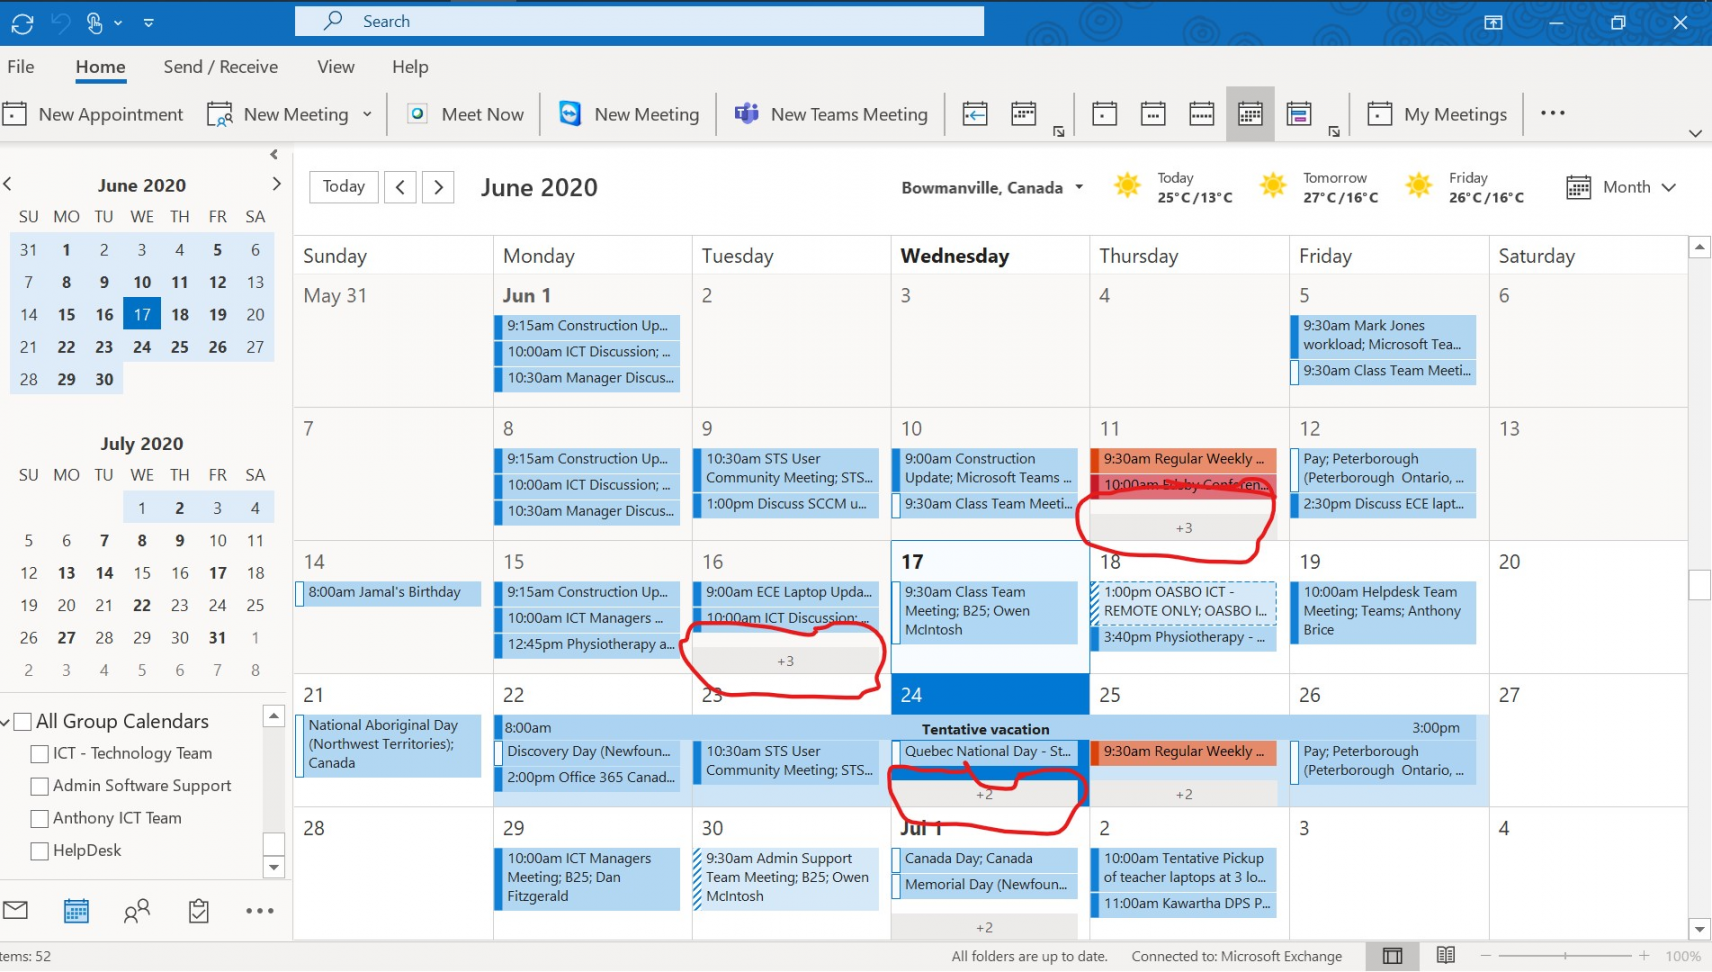 Show all calendar events in Month View; Don